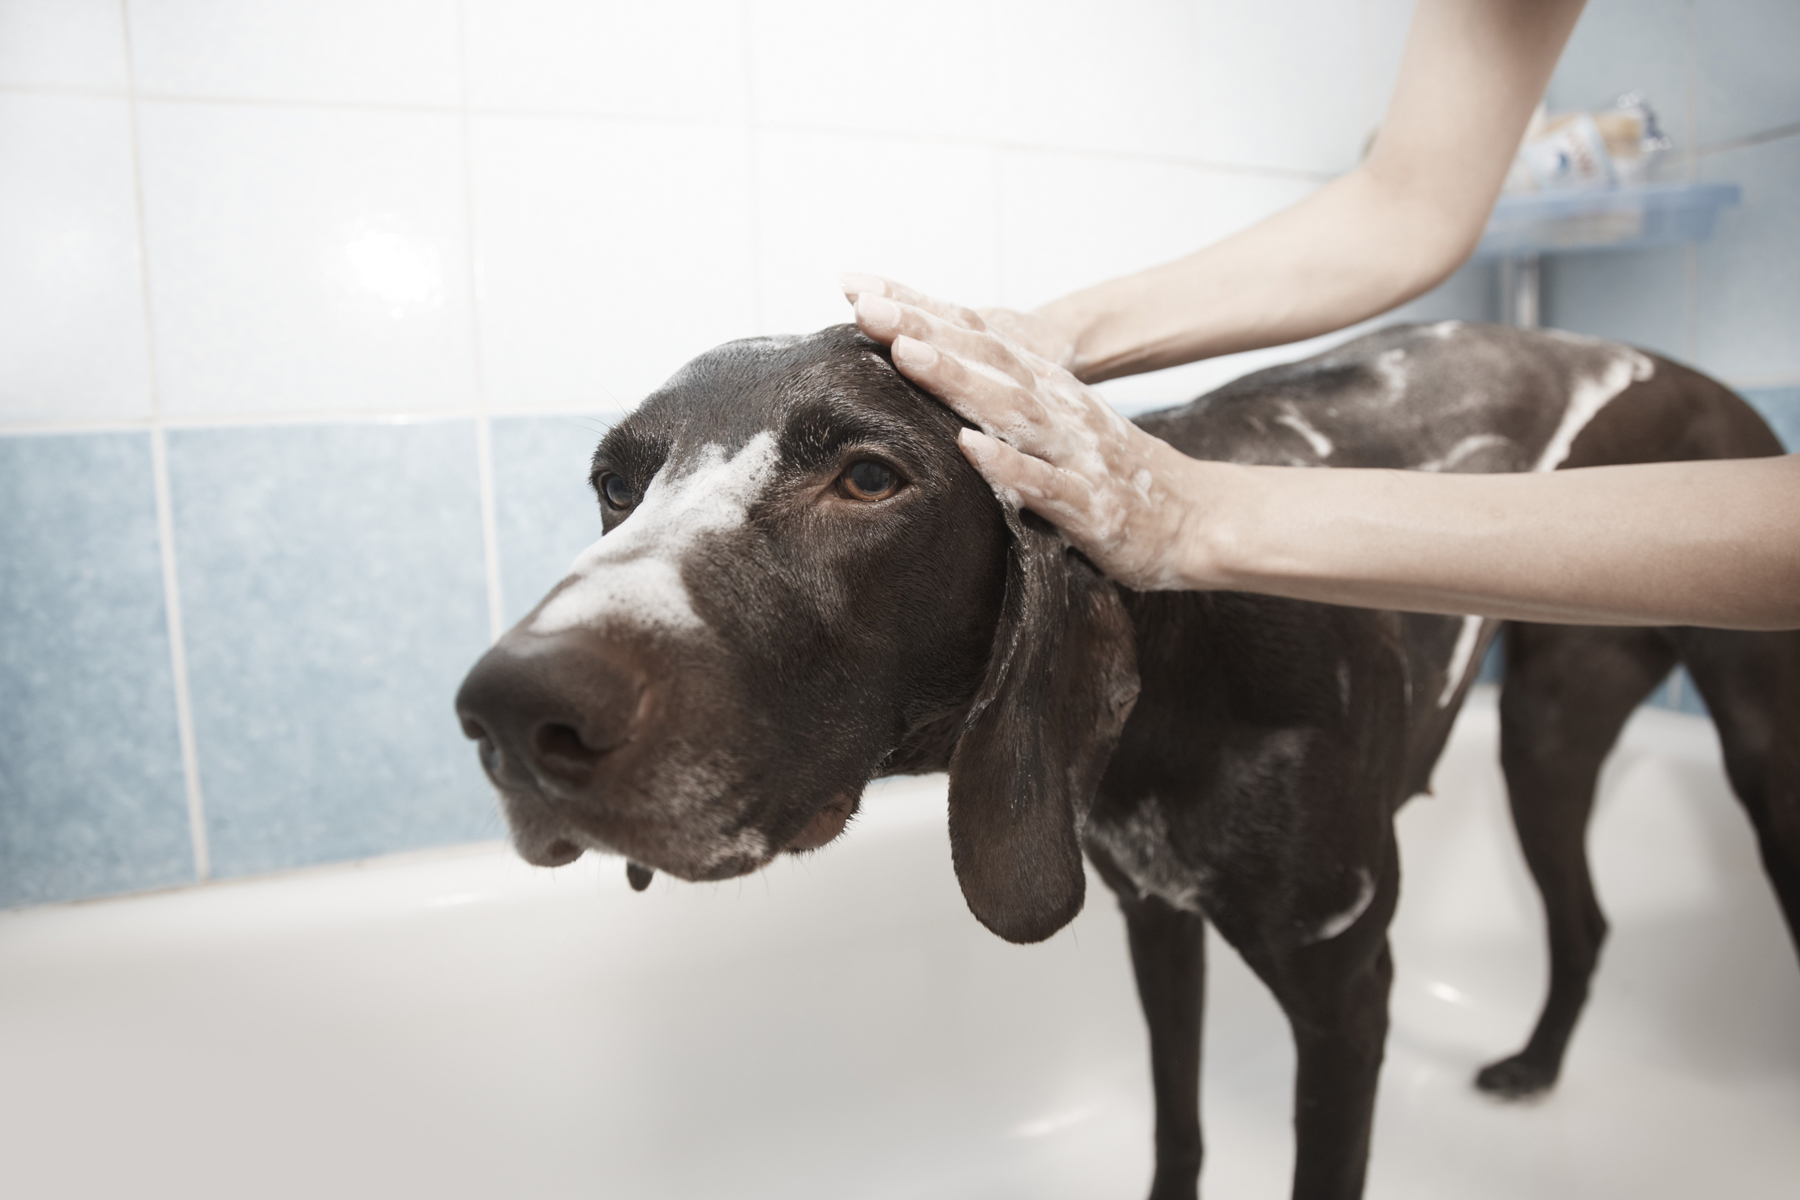 A dog in a bath tub being washed by its owner